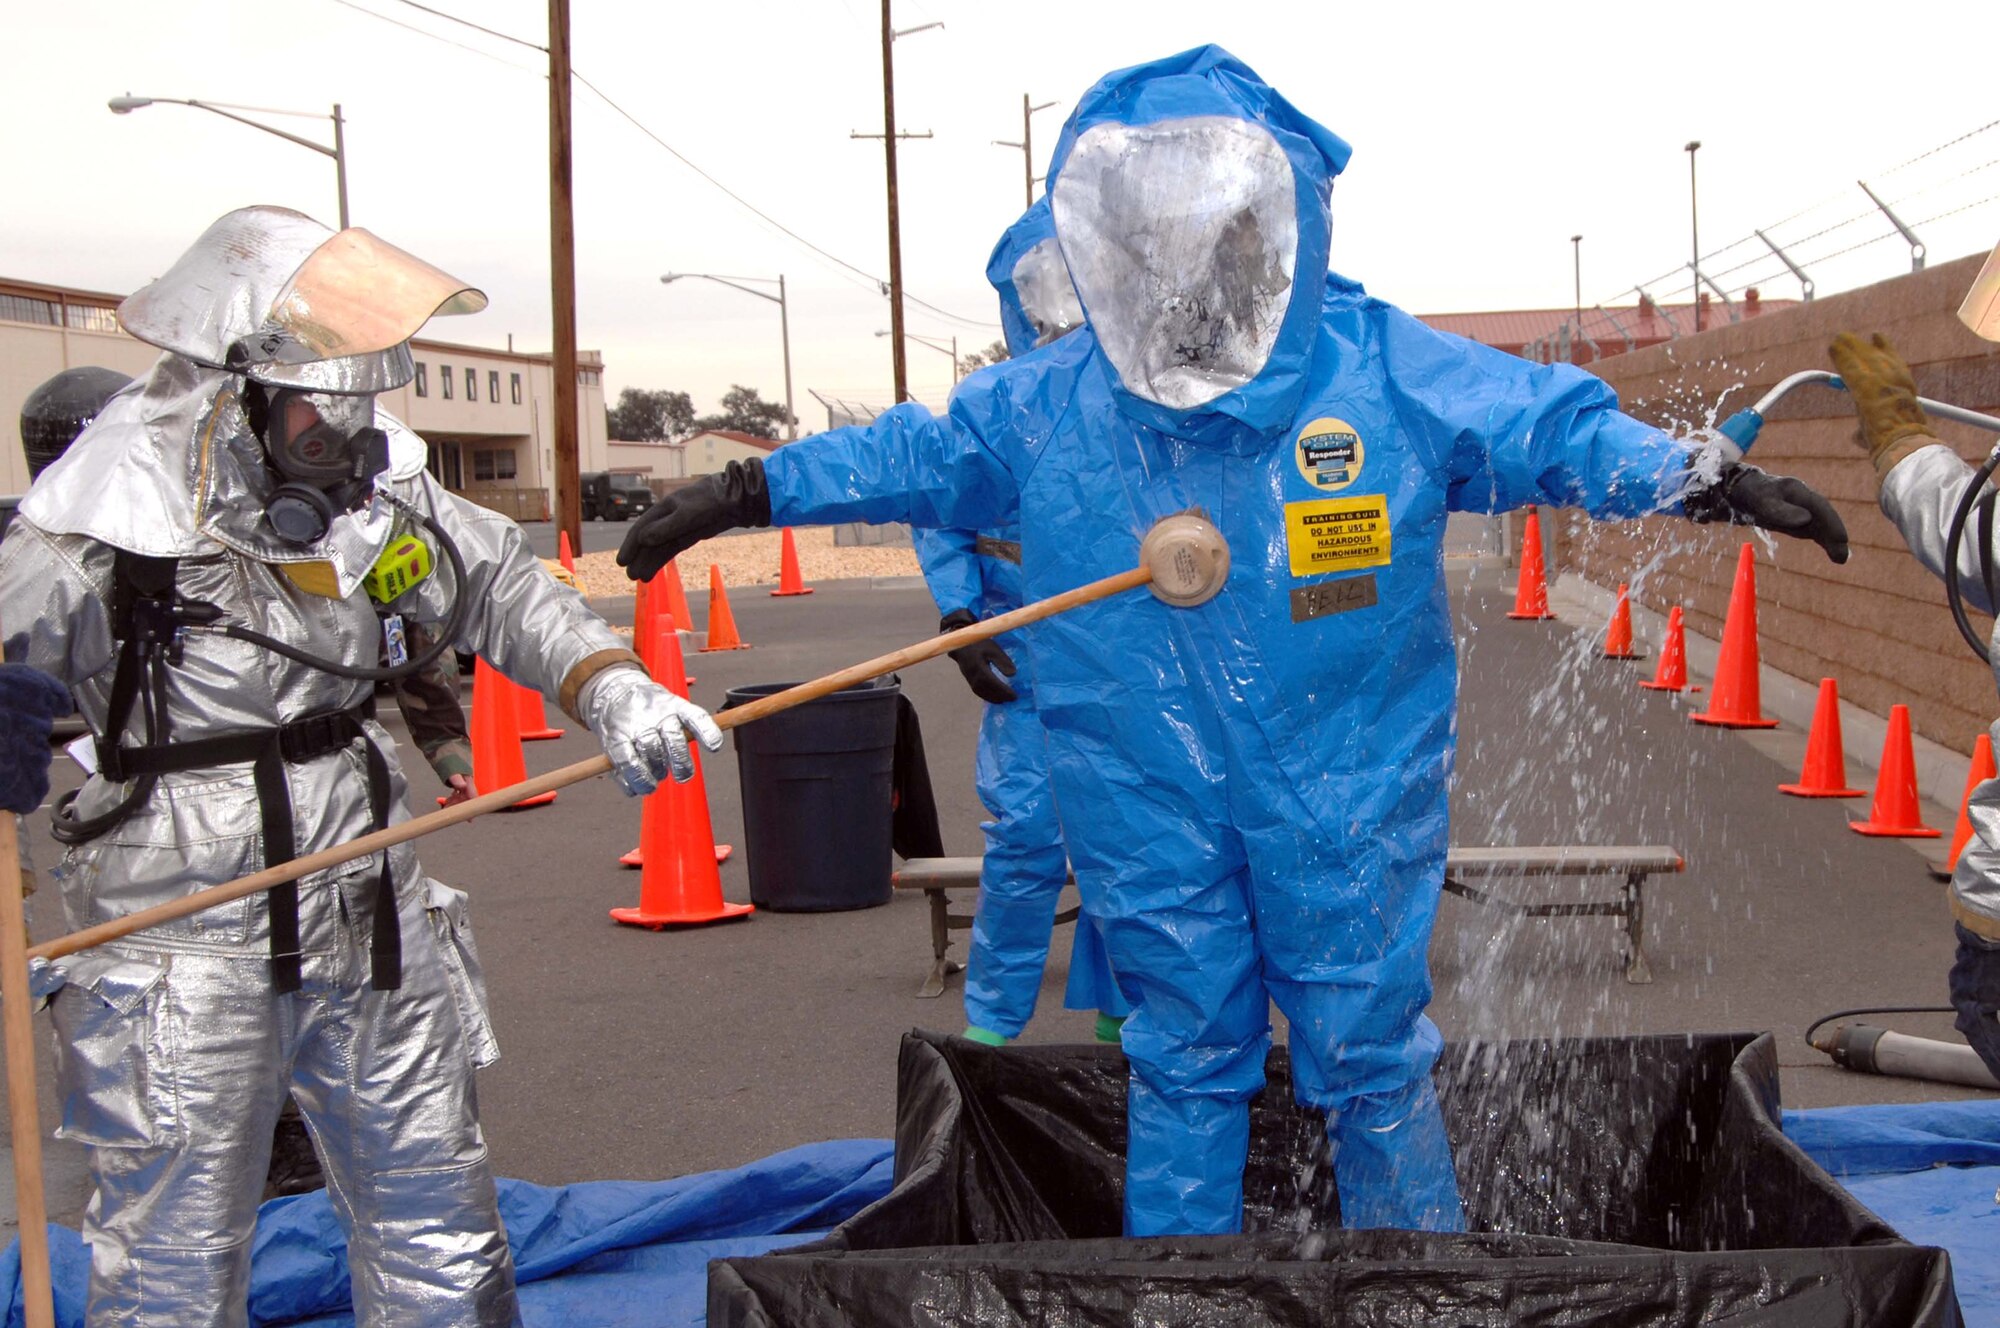 Fire Fighters decontaminate a Hazardous Materials team member during the Home Station Attack Response Exercise Feb. 21. The exercise evaluated the wing’s ability to execute the Comprehensive Emergency Management Plan in response to a terrorist’s use of various weapons. (U.S. Air Force photo/Nan Wylie)